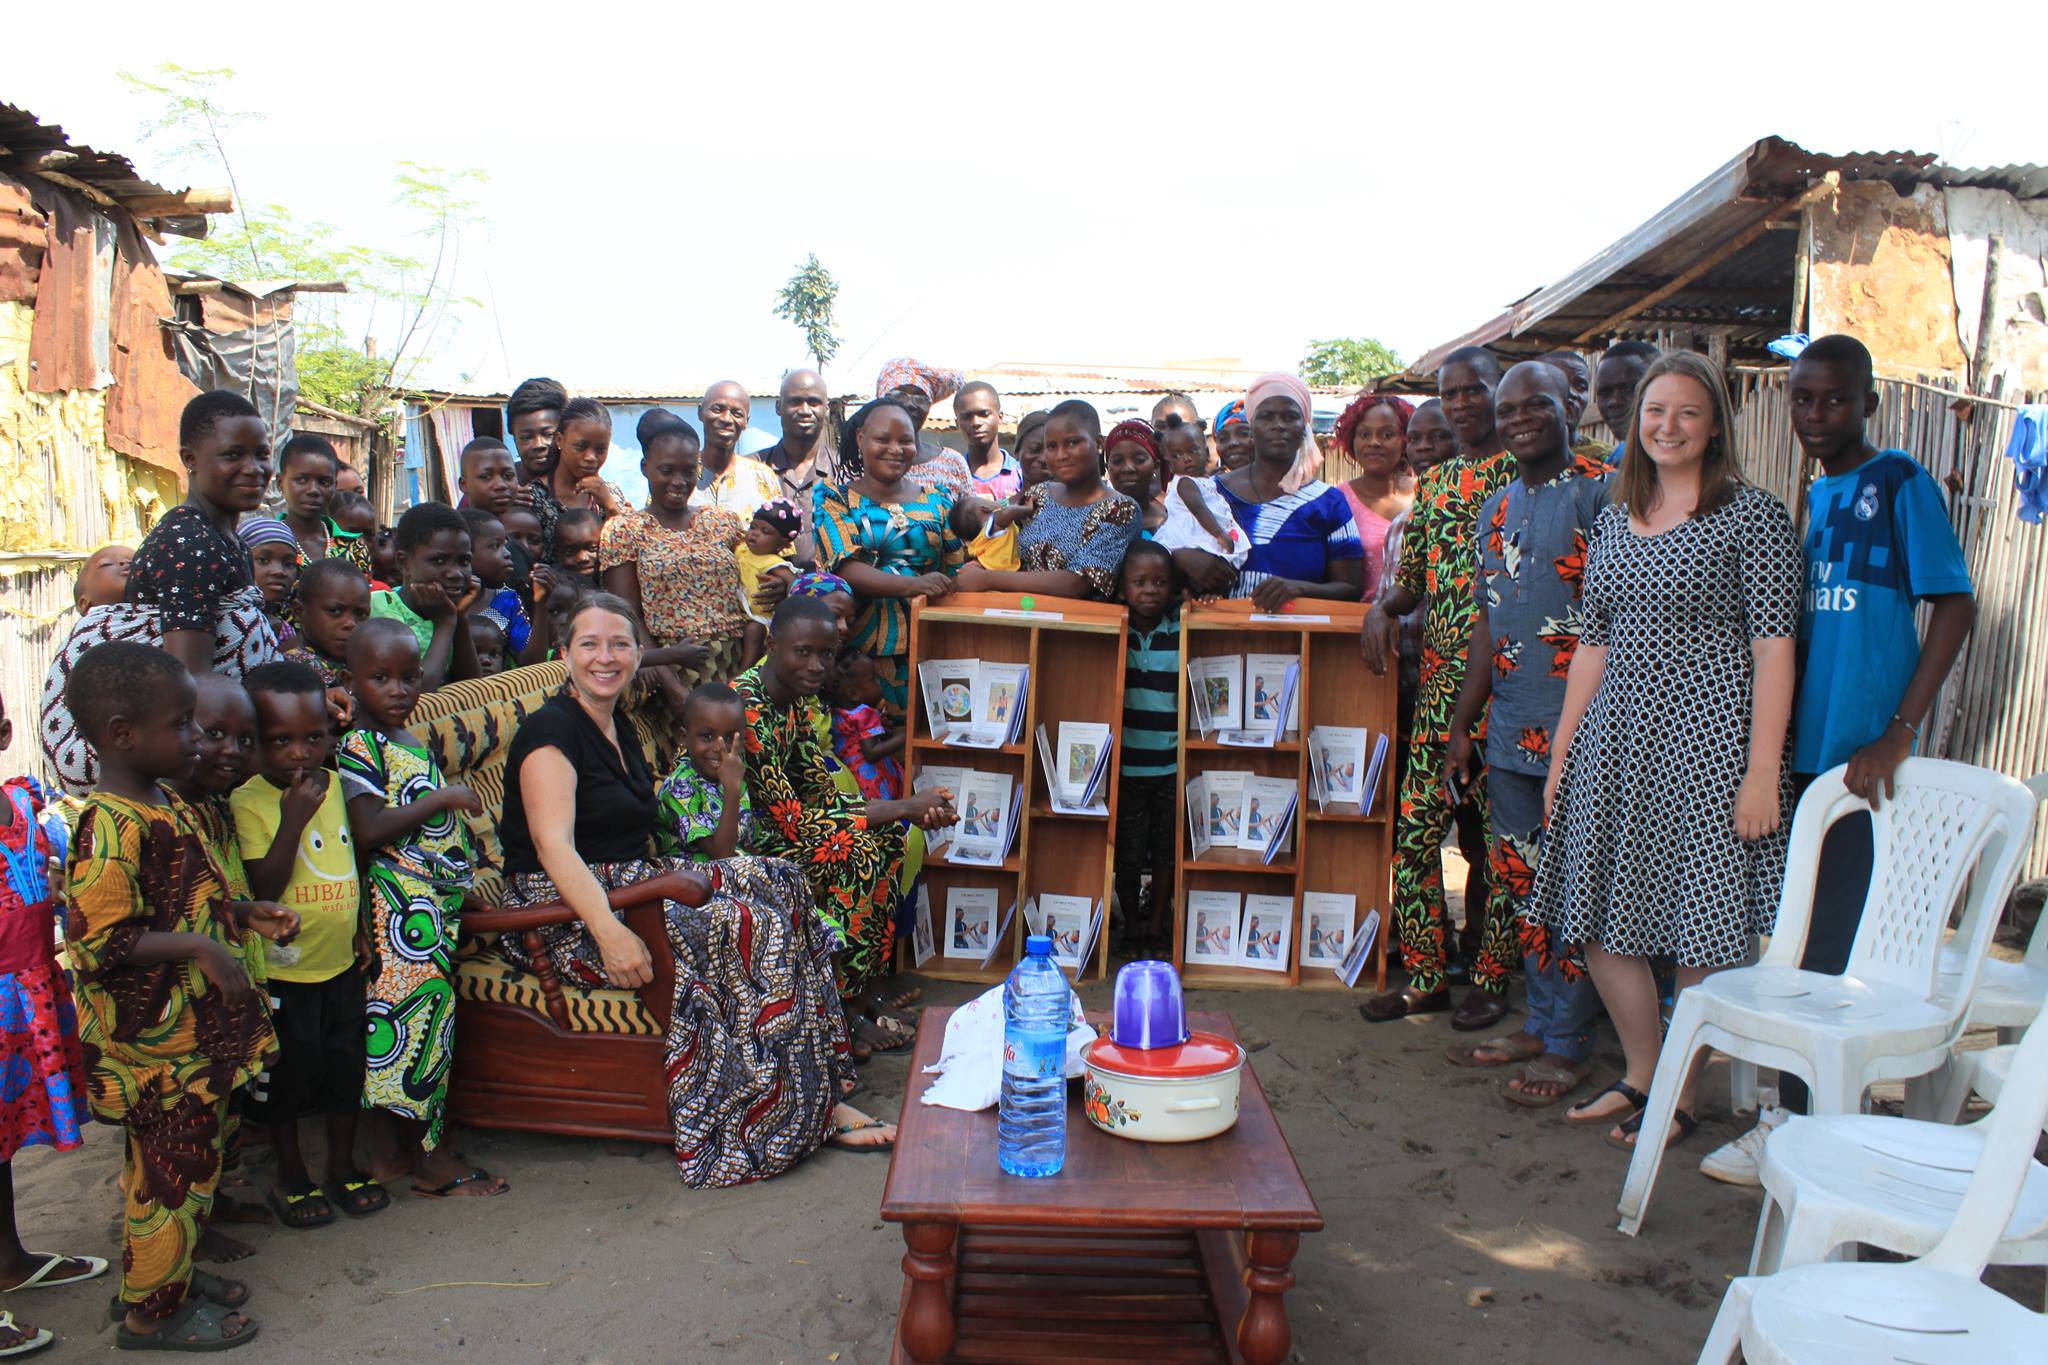 Photo showing launch of second volume of Books that Bind in Benin West Africa